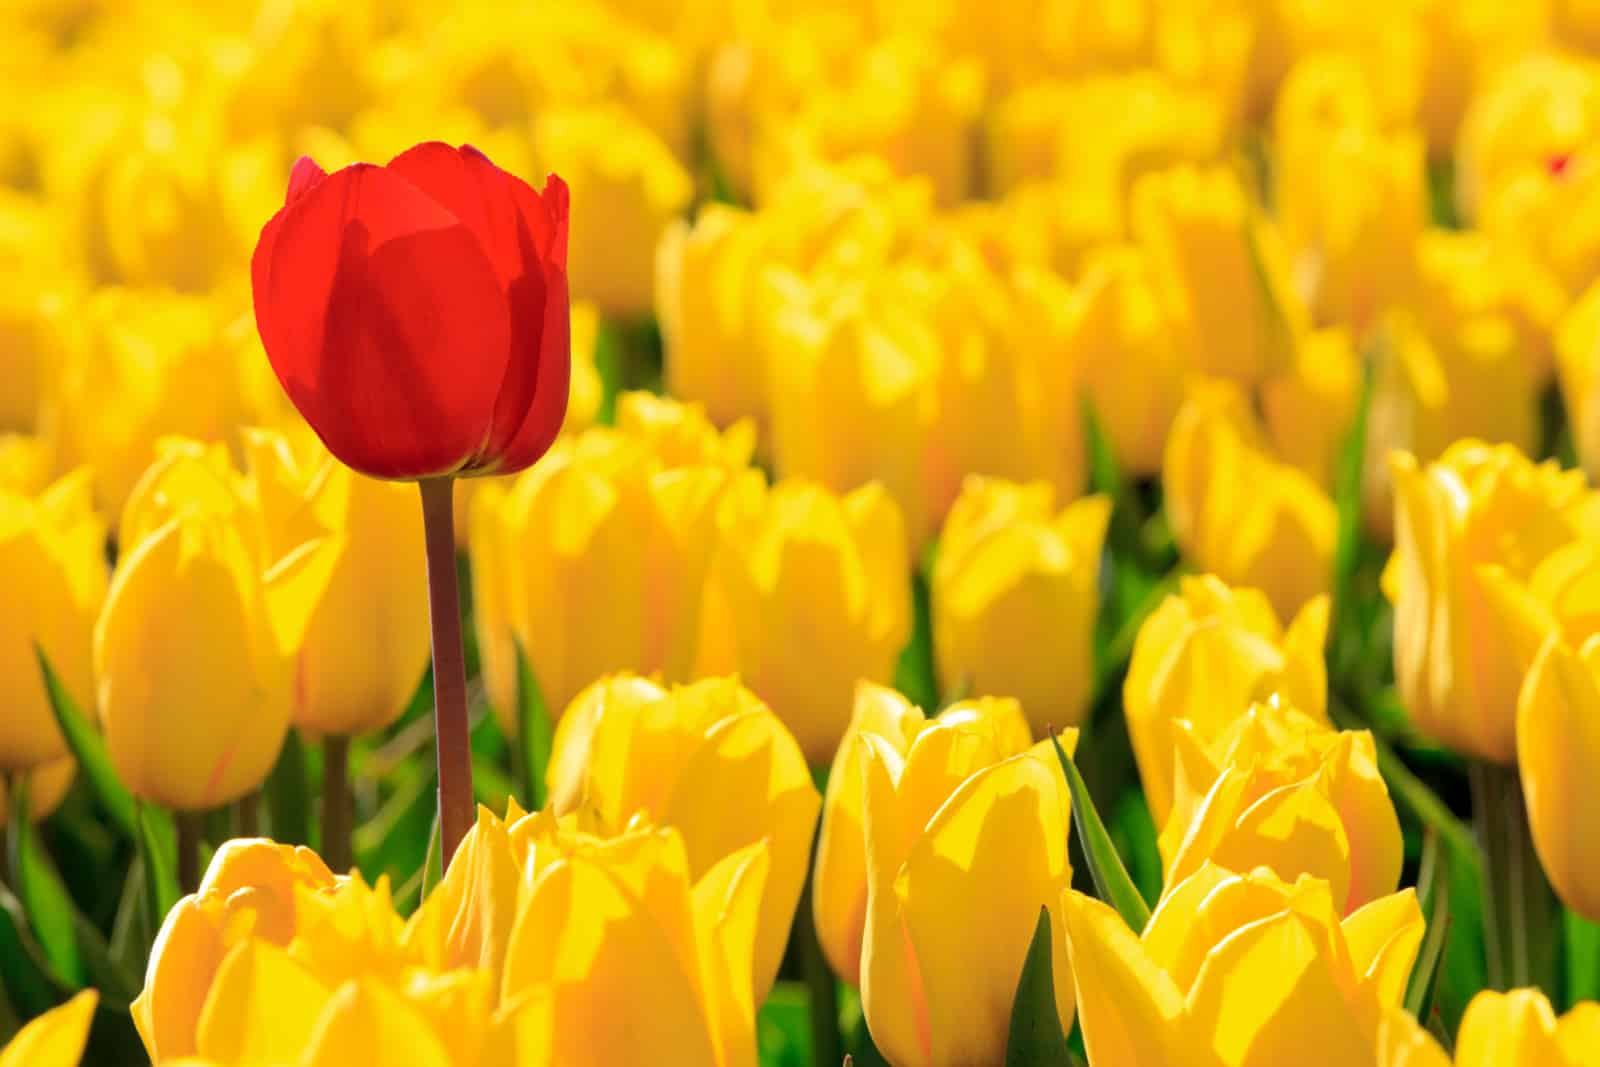 one red tulip among yellow tulips, the concept of being different